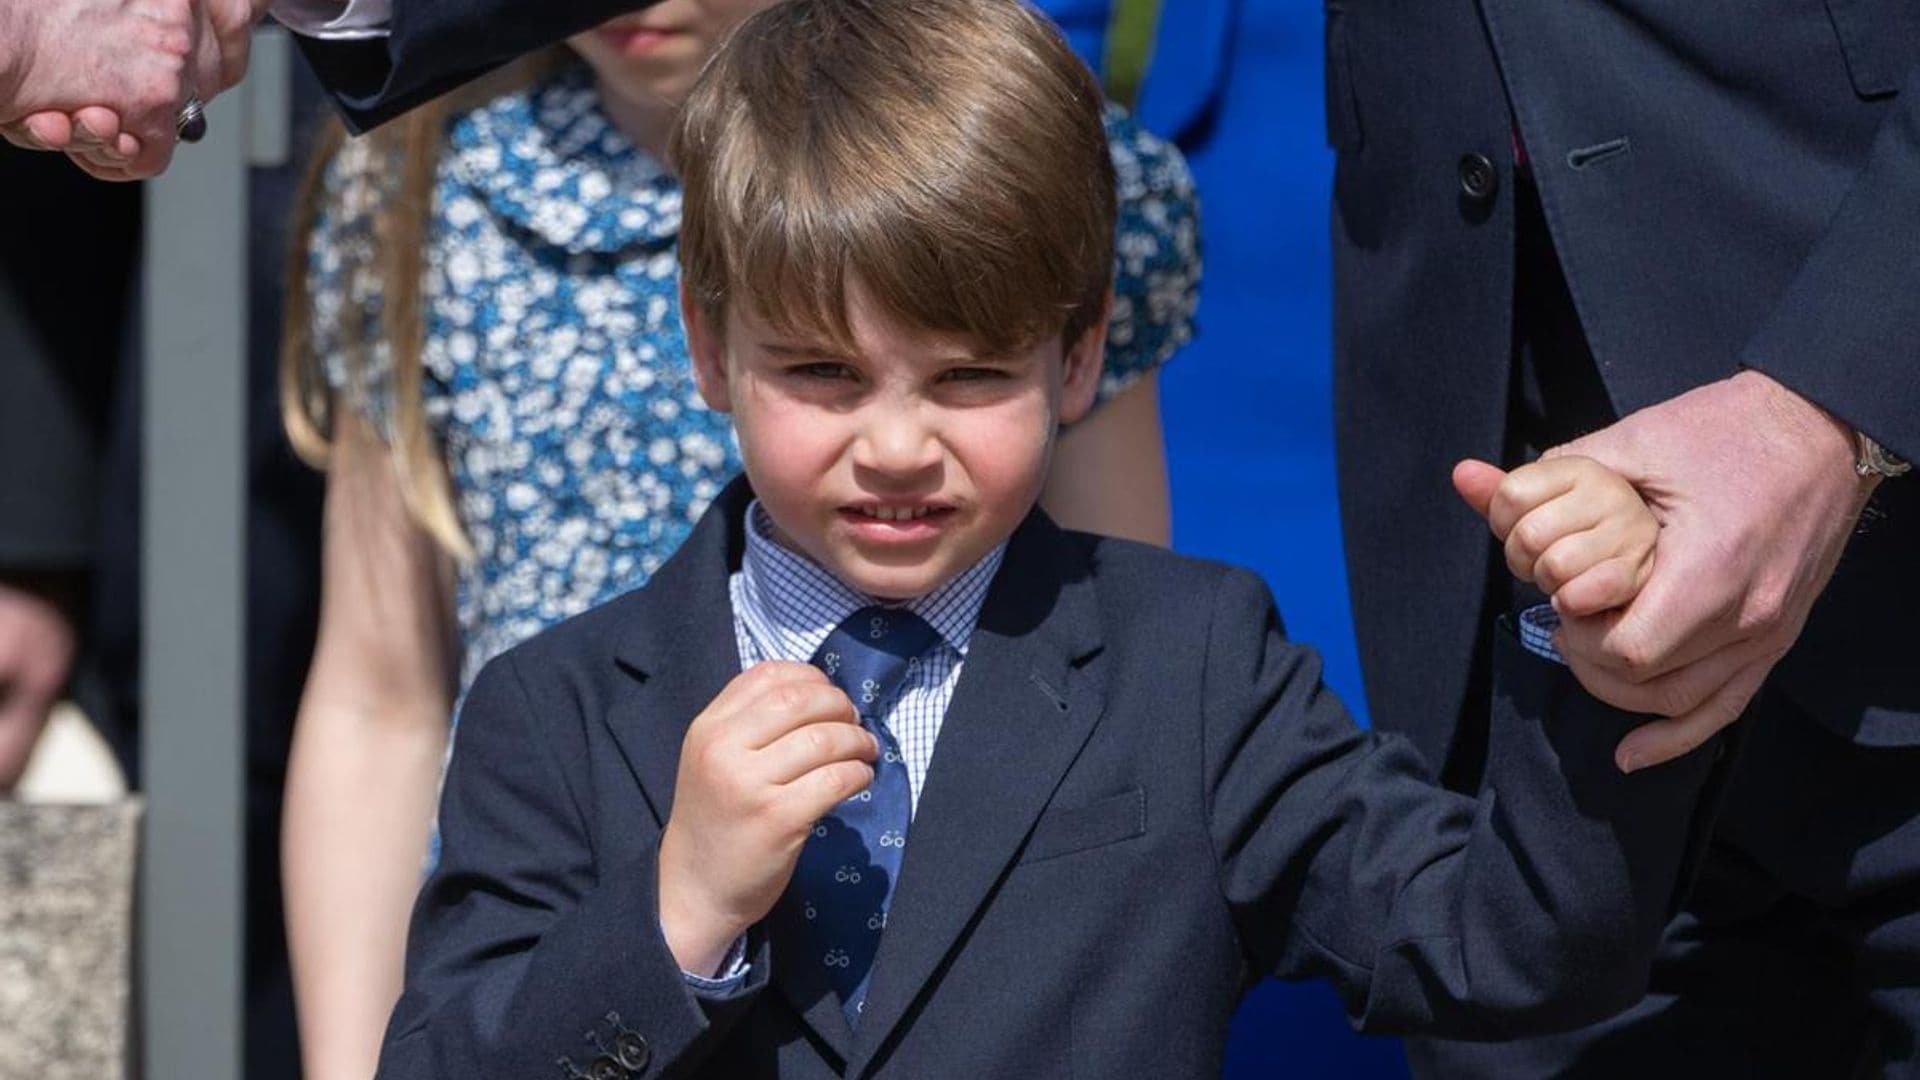 Prince Louis attends Easter service for first time with royal family: Photos